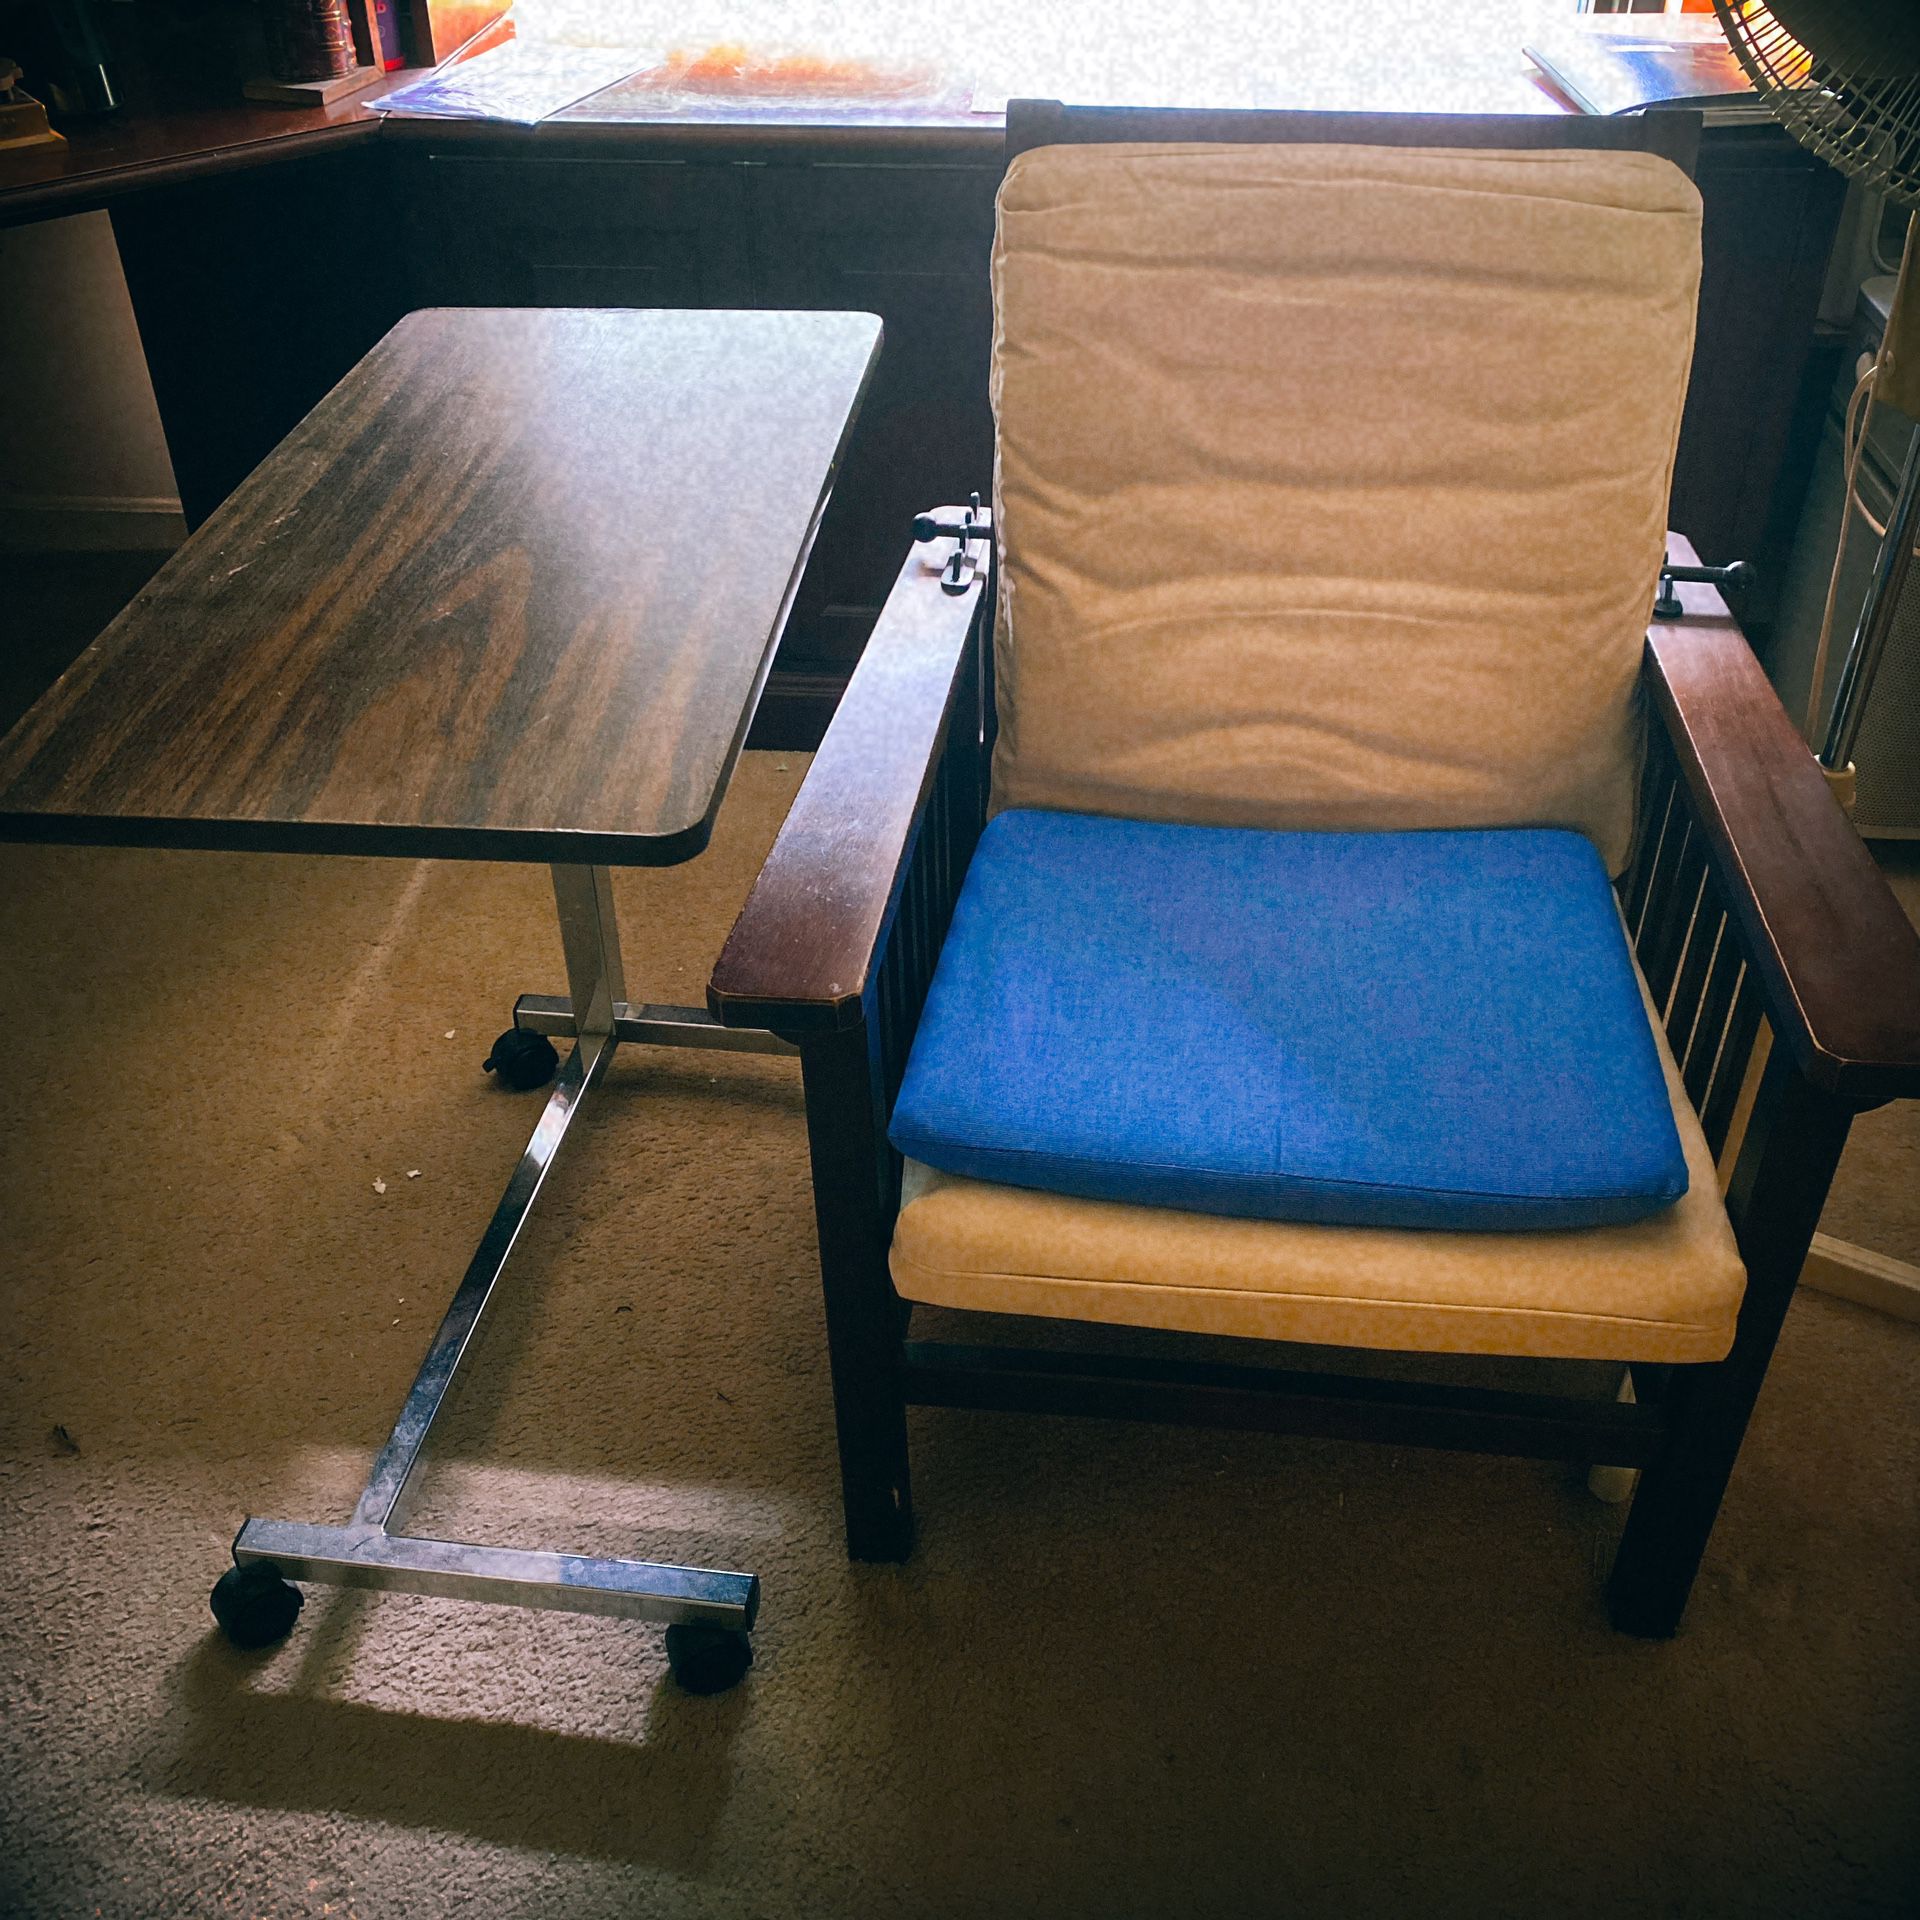 Medical chair and table